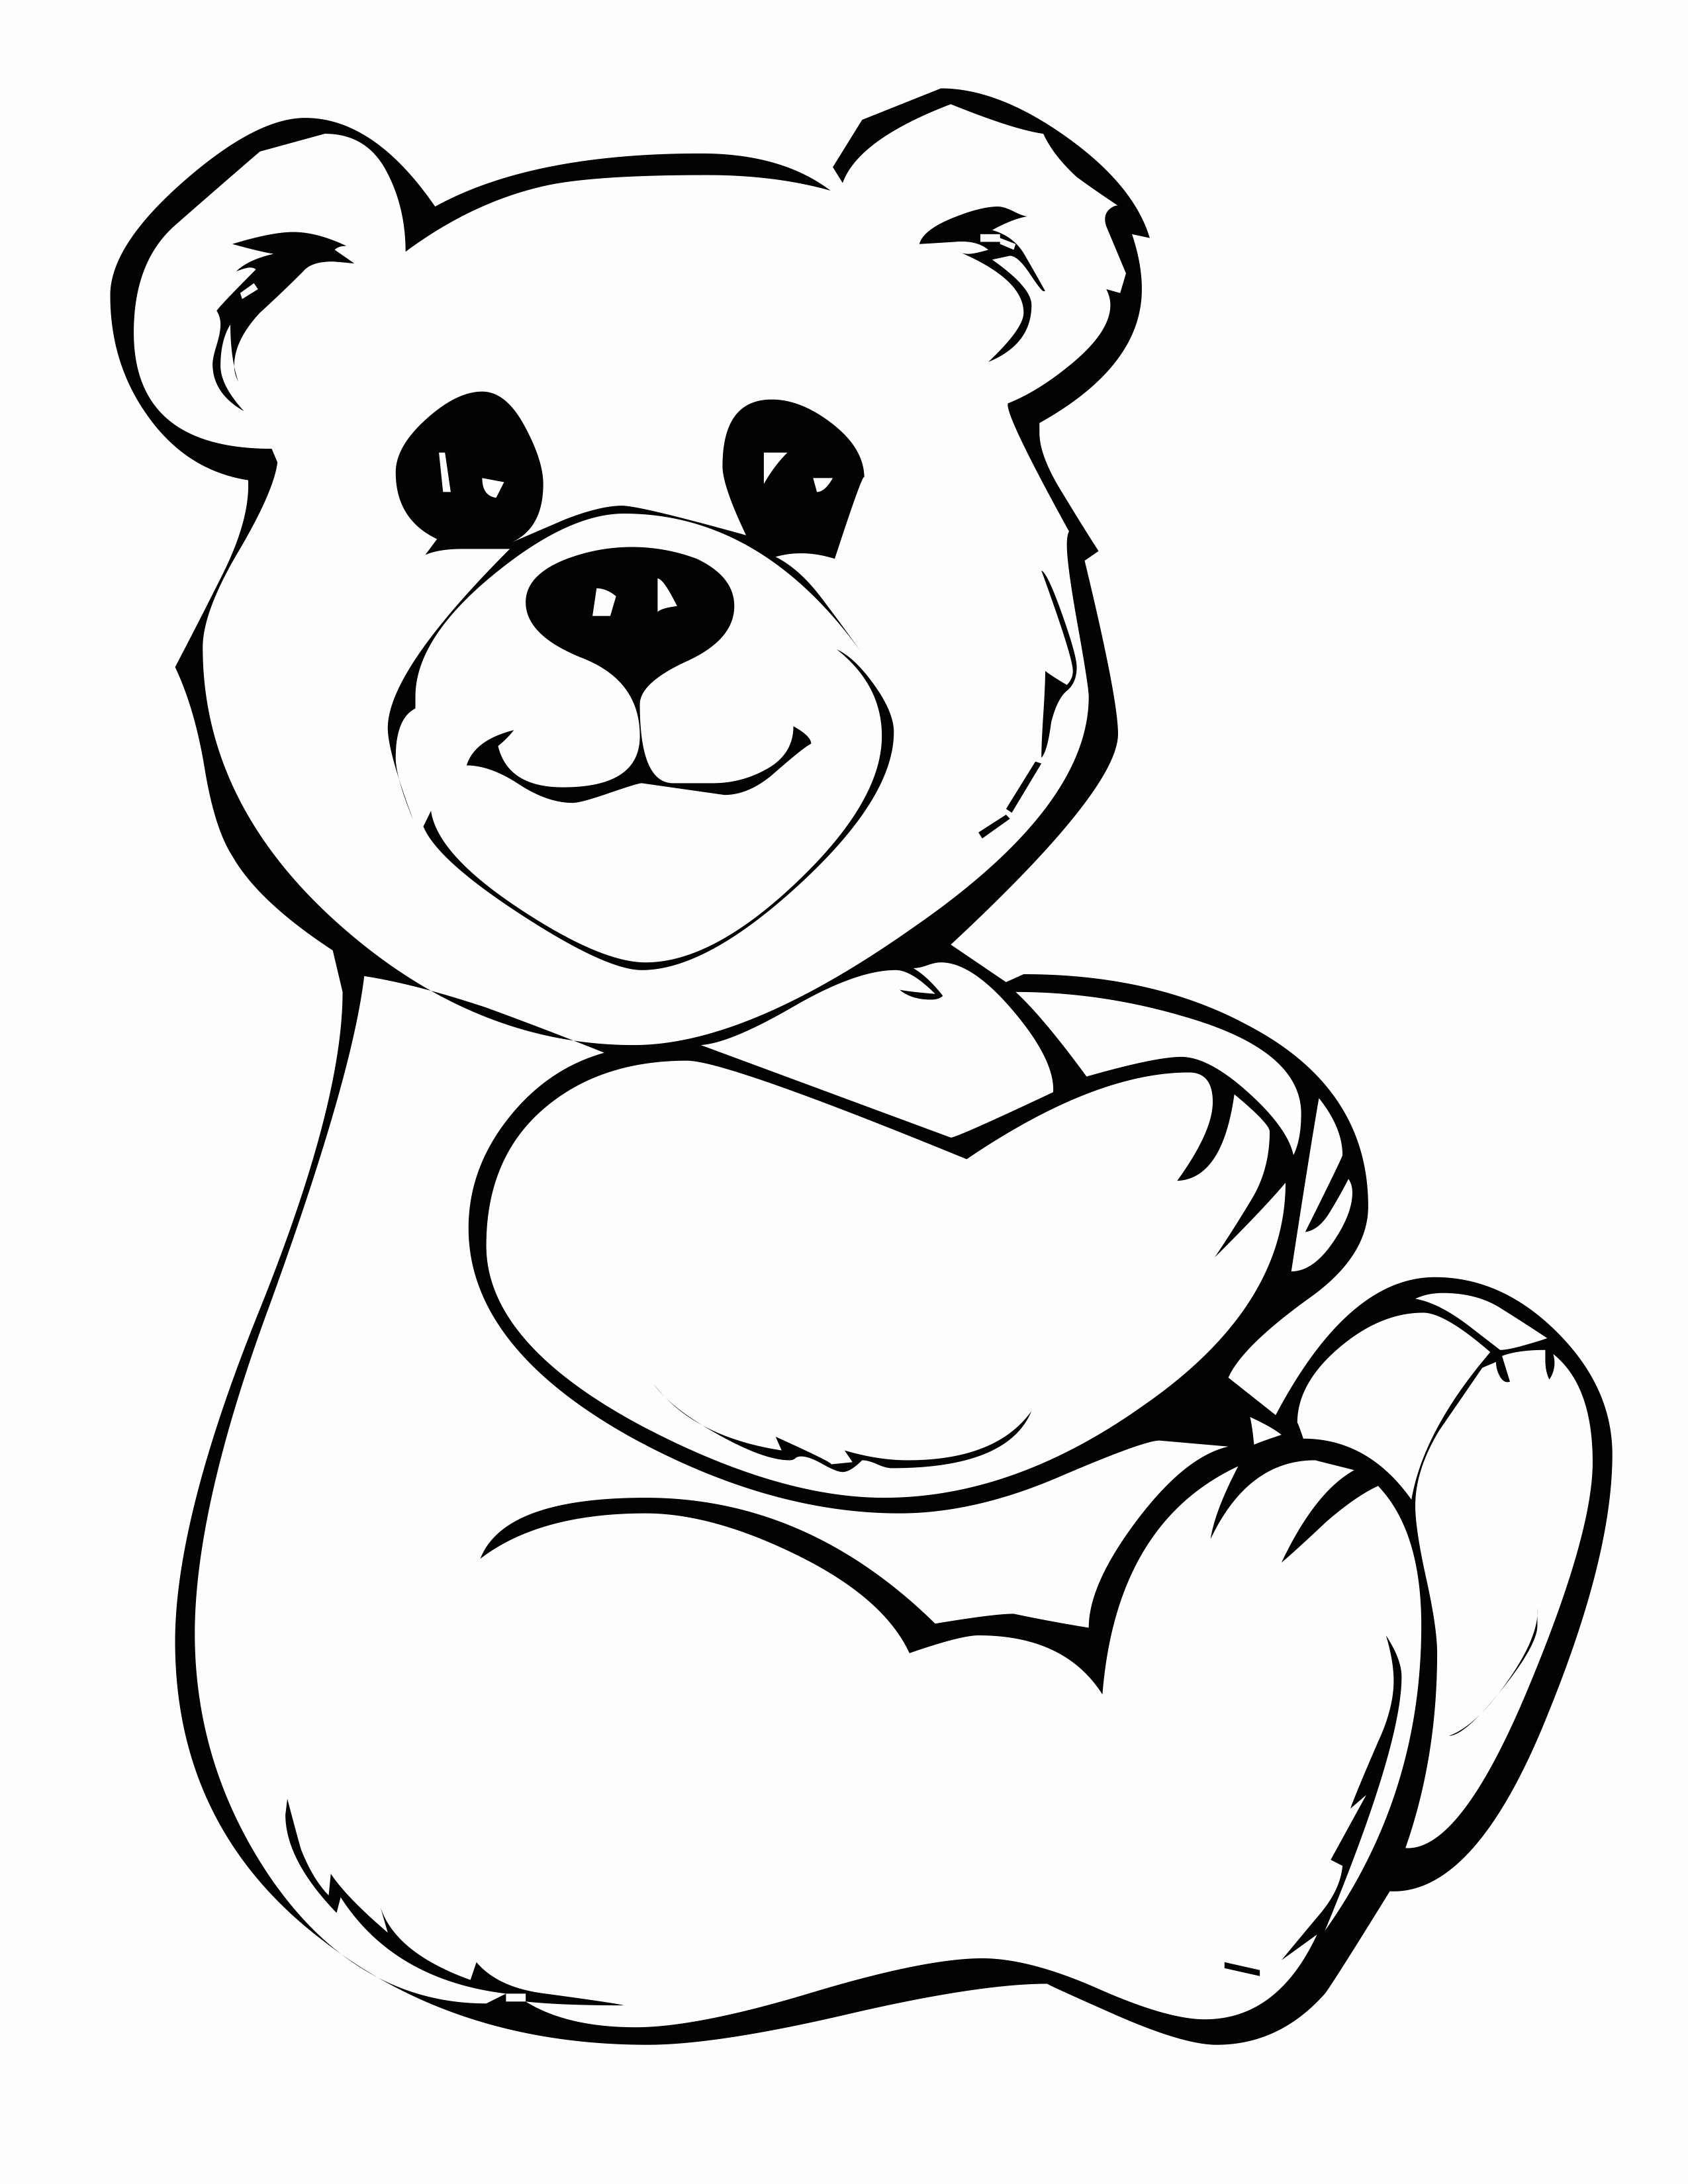 teddy bear coloring page baby teddy bear coloring pages teddy